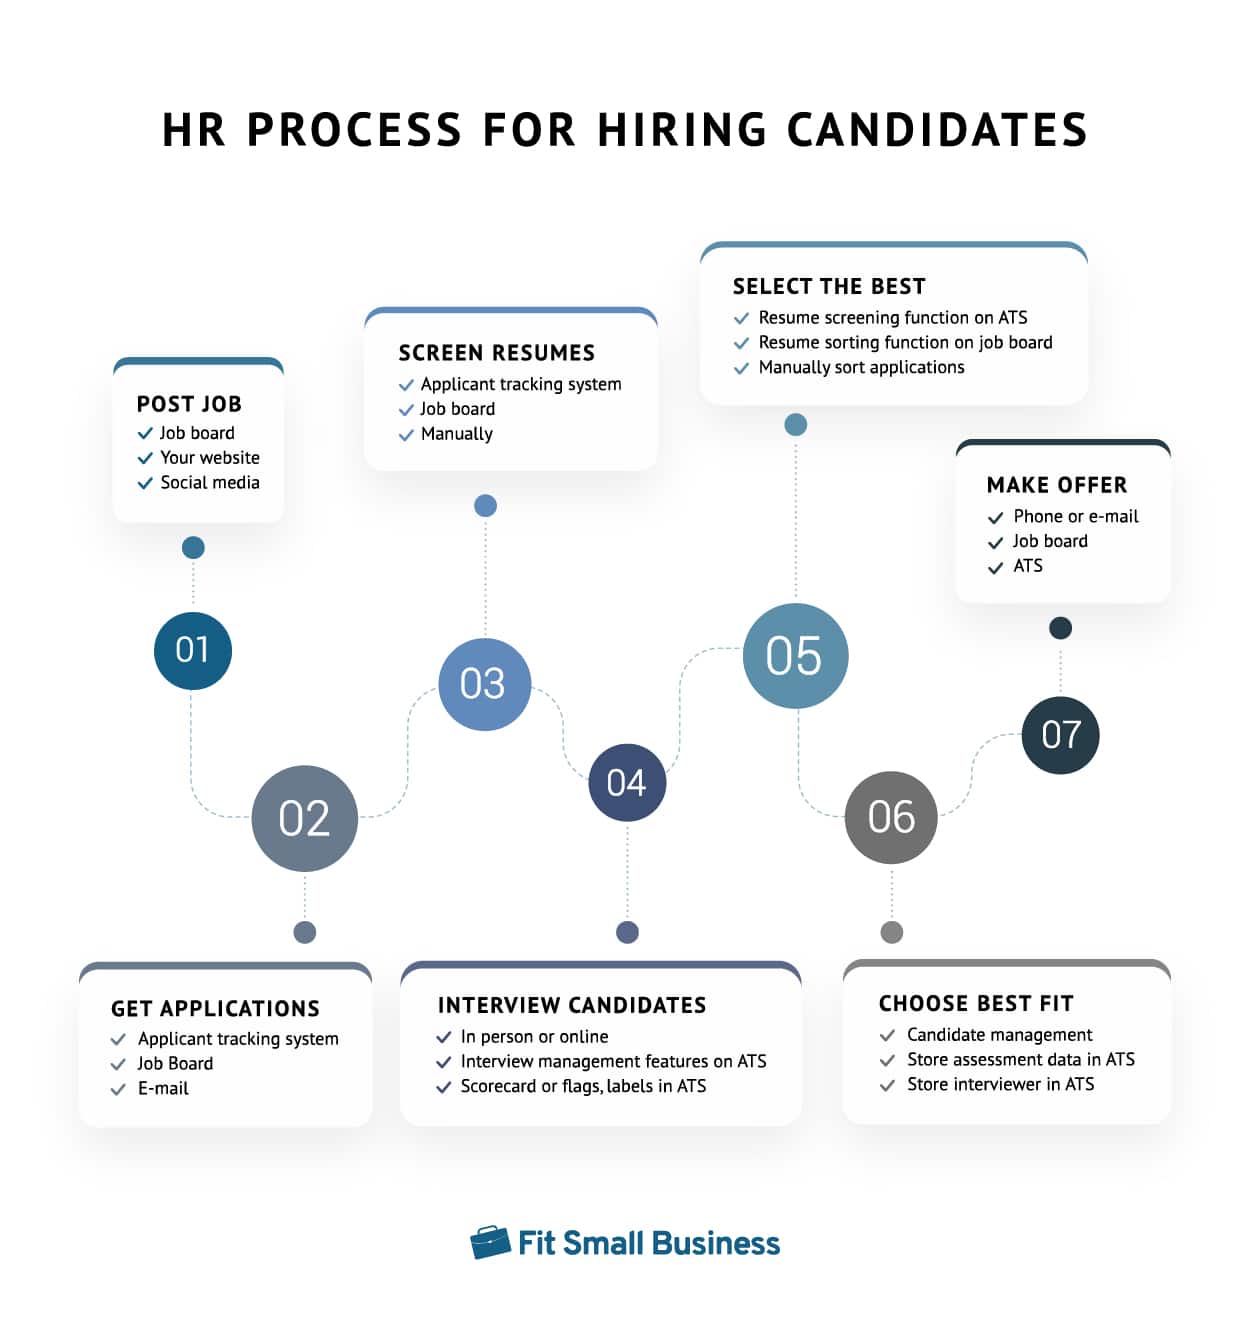 Showing a graphic of HR process for hiring candidates.